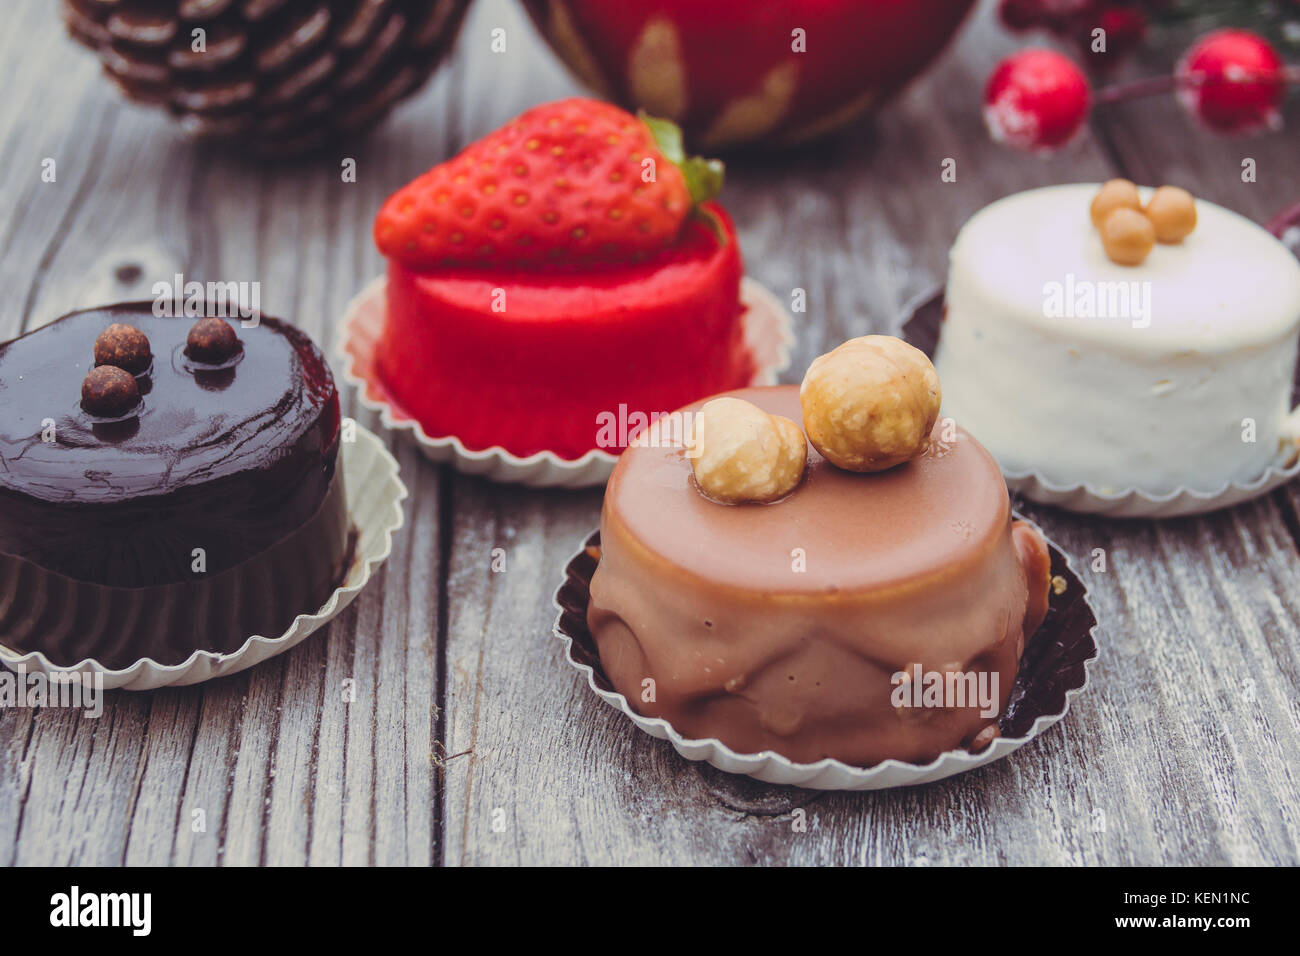 An array of Christmas desserts with colorful   , on wooden board Stock Photo